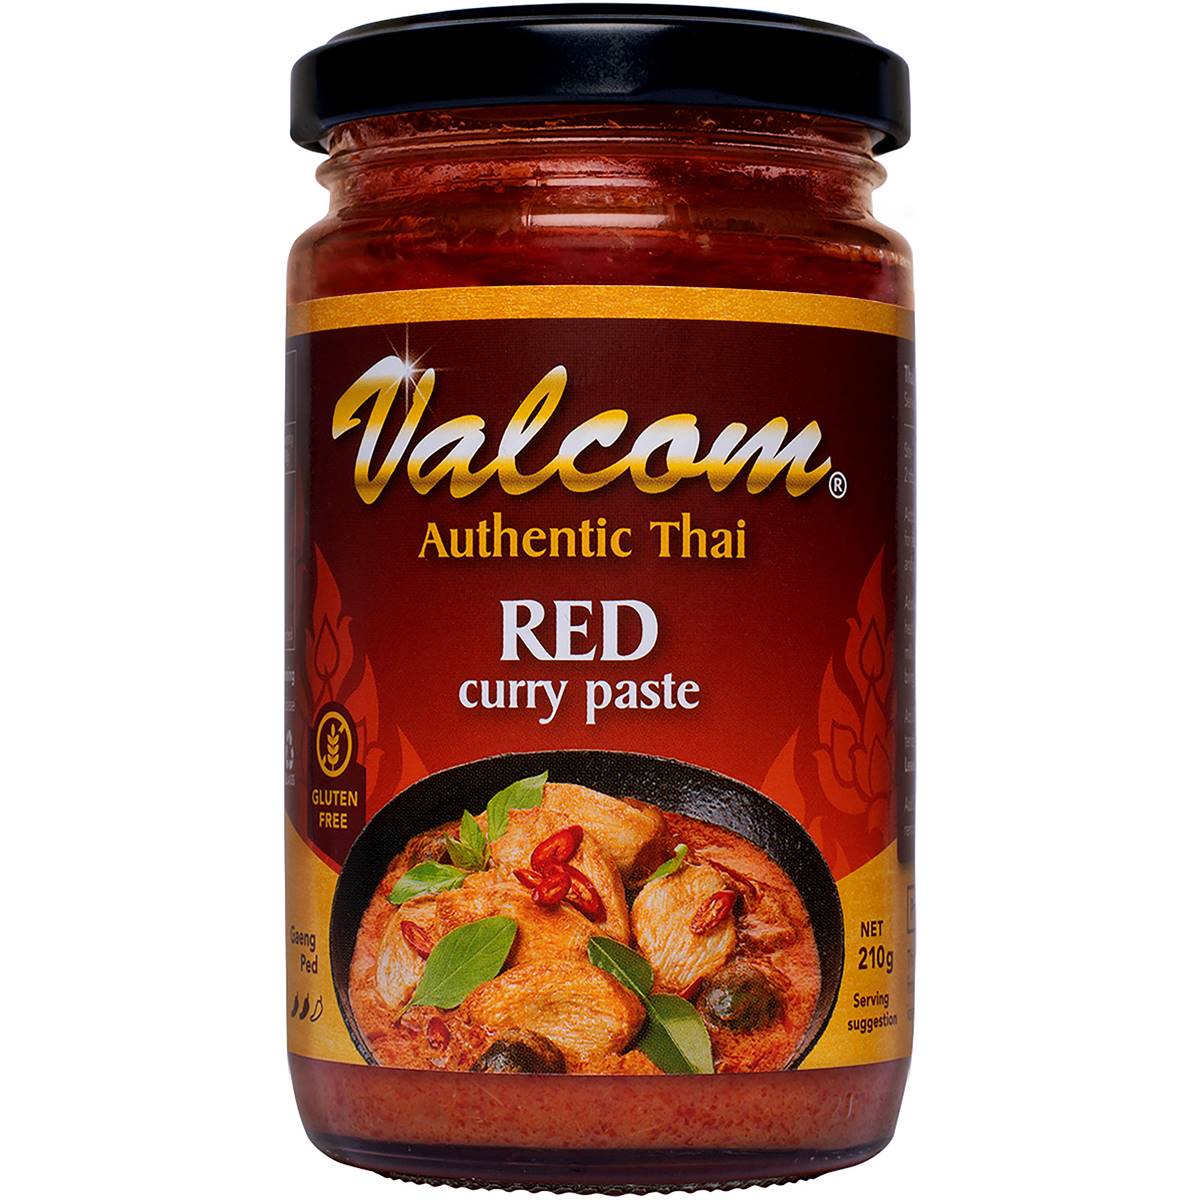 whats in red curry paste